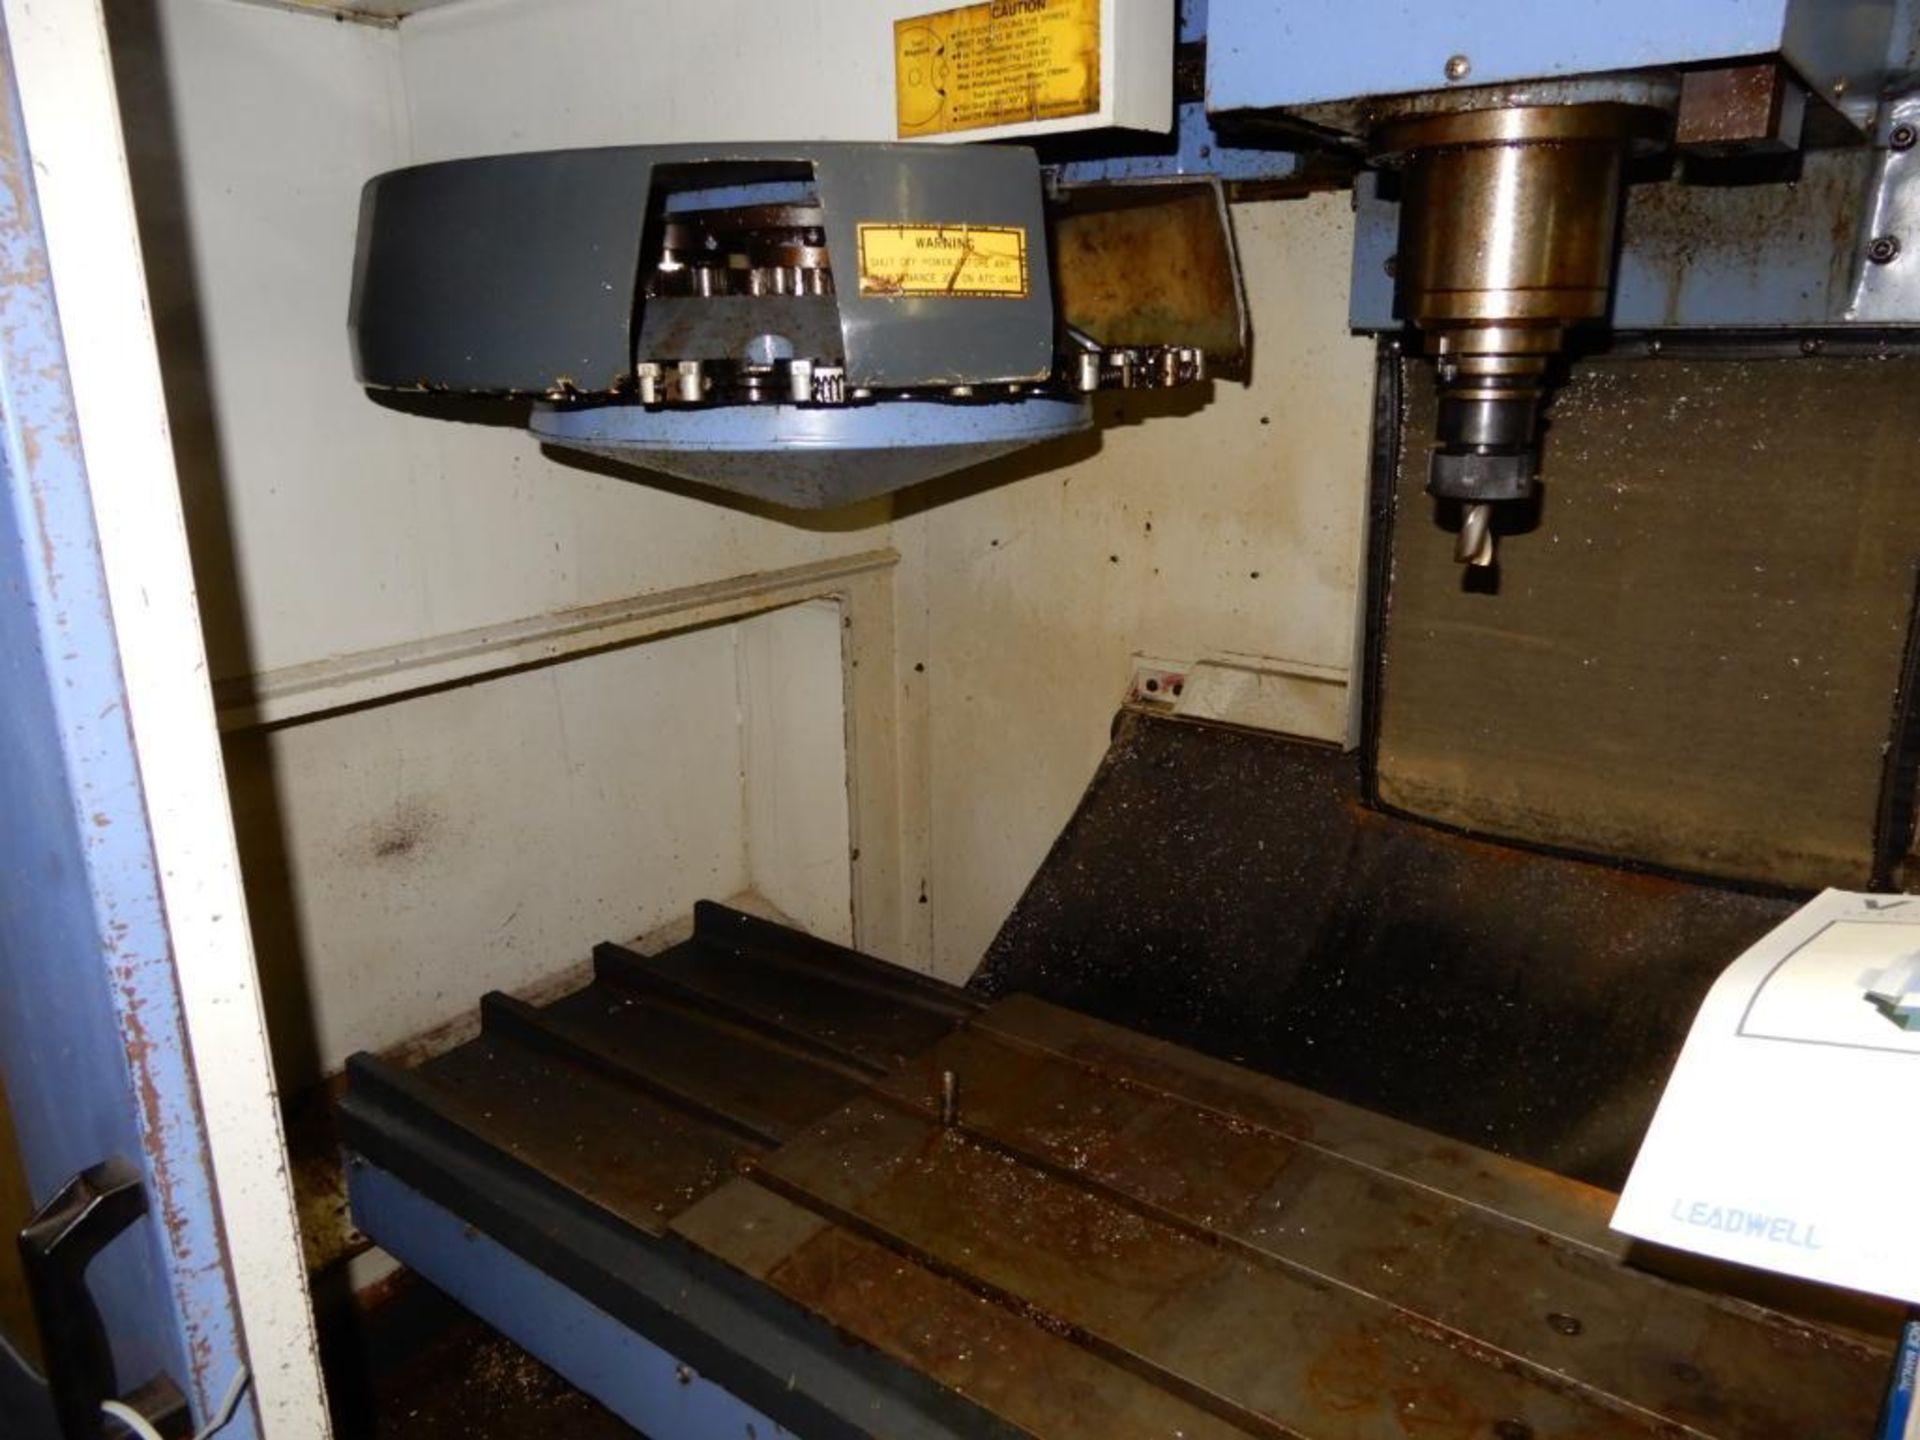 Leadwell CNC Vertical Machining Center Model V-25, S/N L1SID0027 (1994), 30 in. x 15 in. Table, 25 i - Image 2 of 4